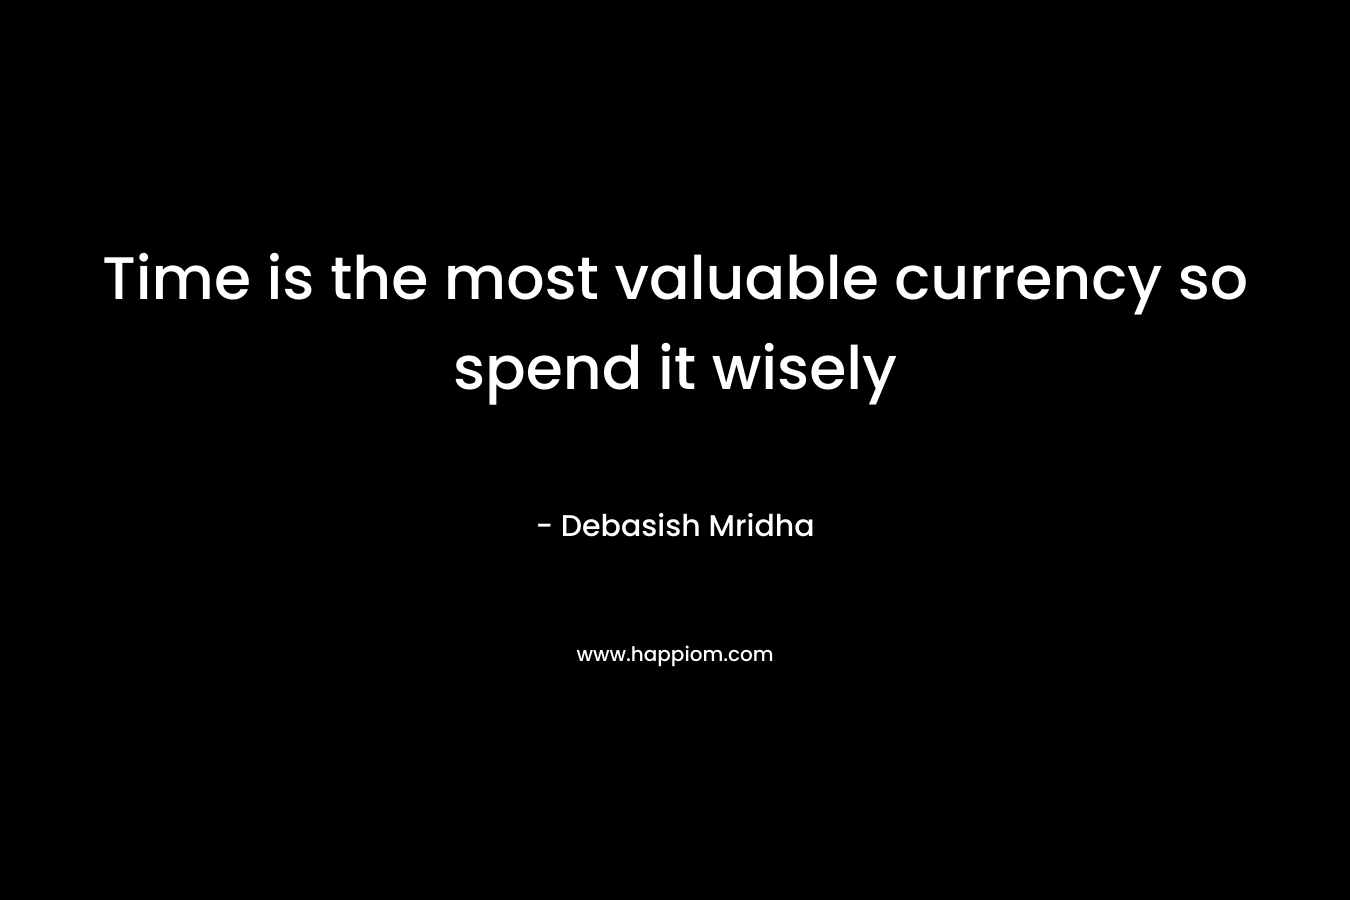 Time is the most valuable currency so spend it wisely